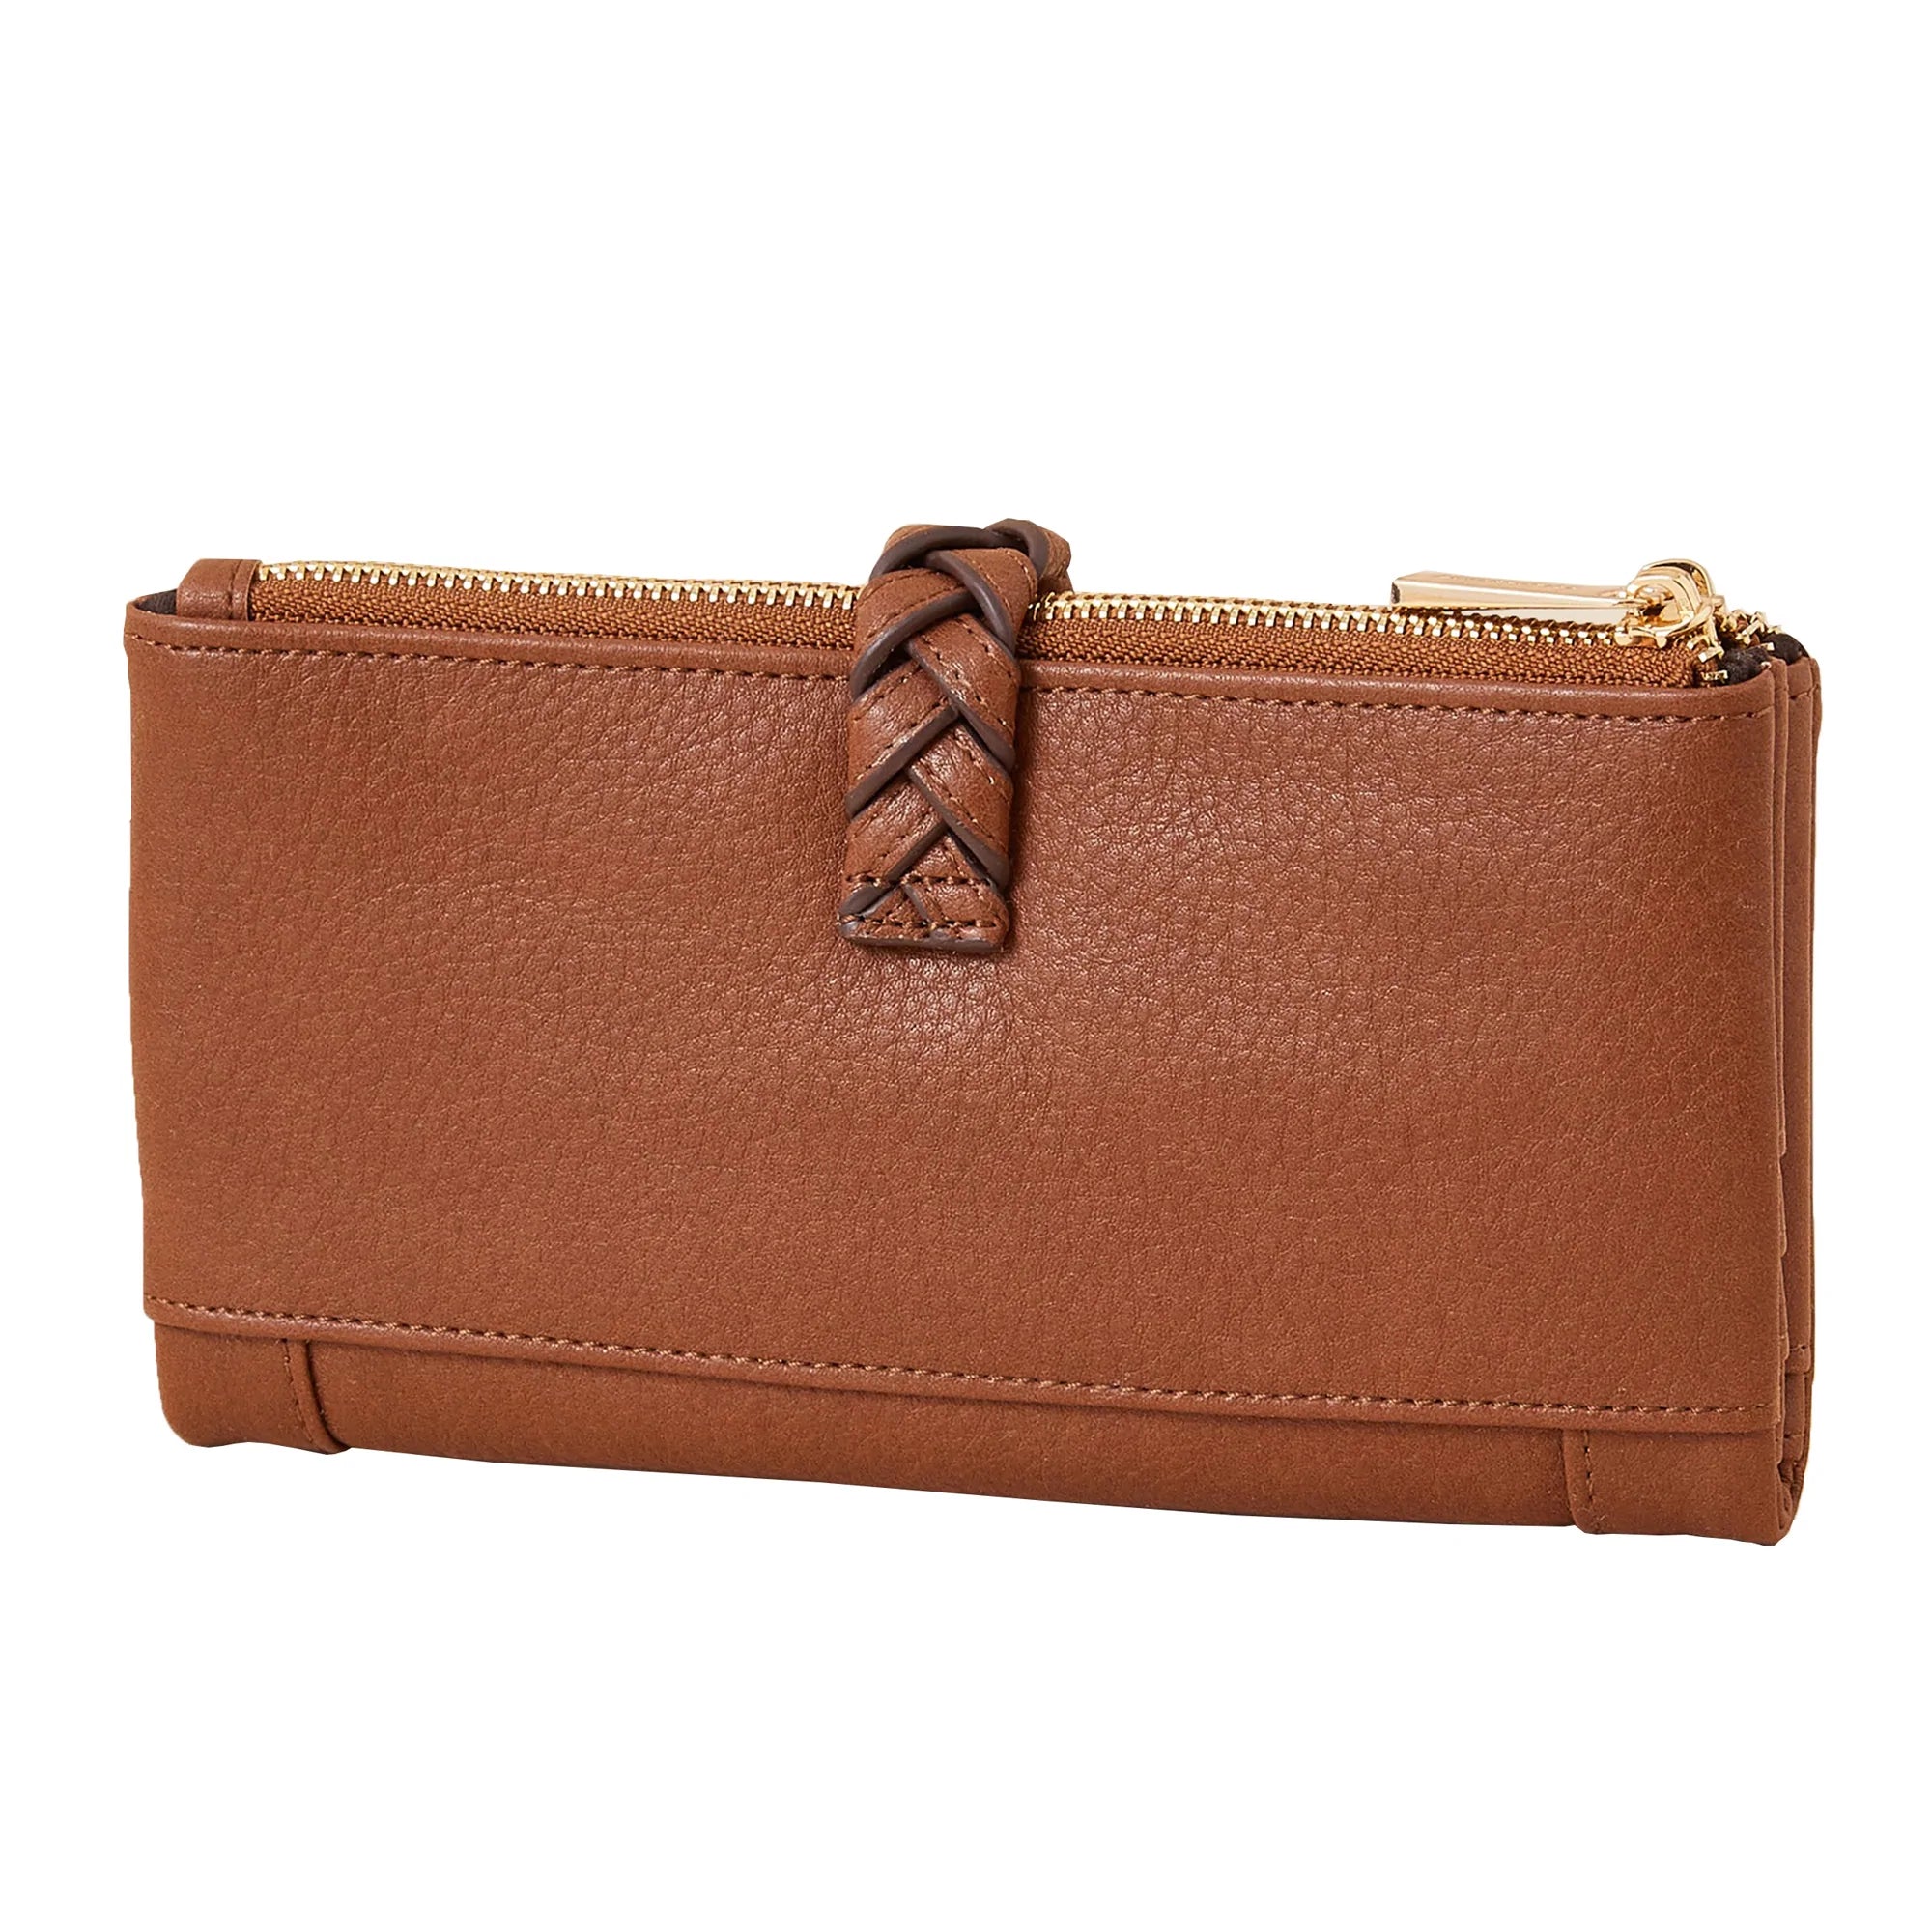 Stylish Lucky Brand Rayla Phone Wallet in Saffron